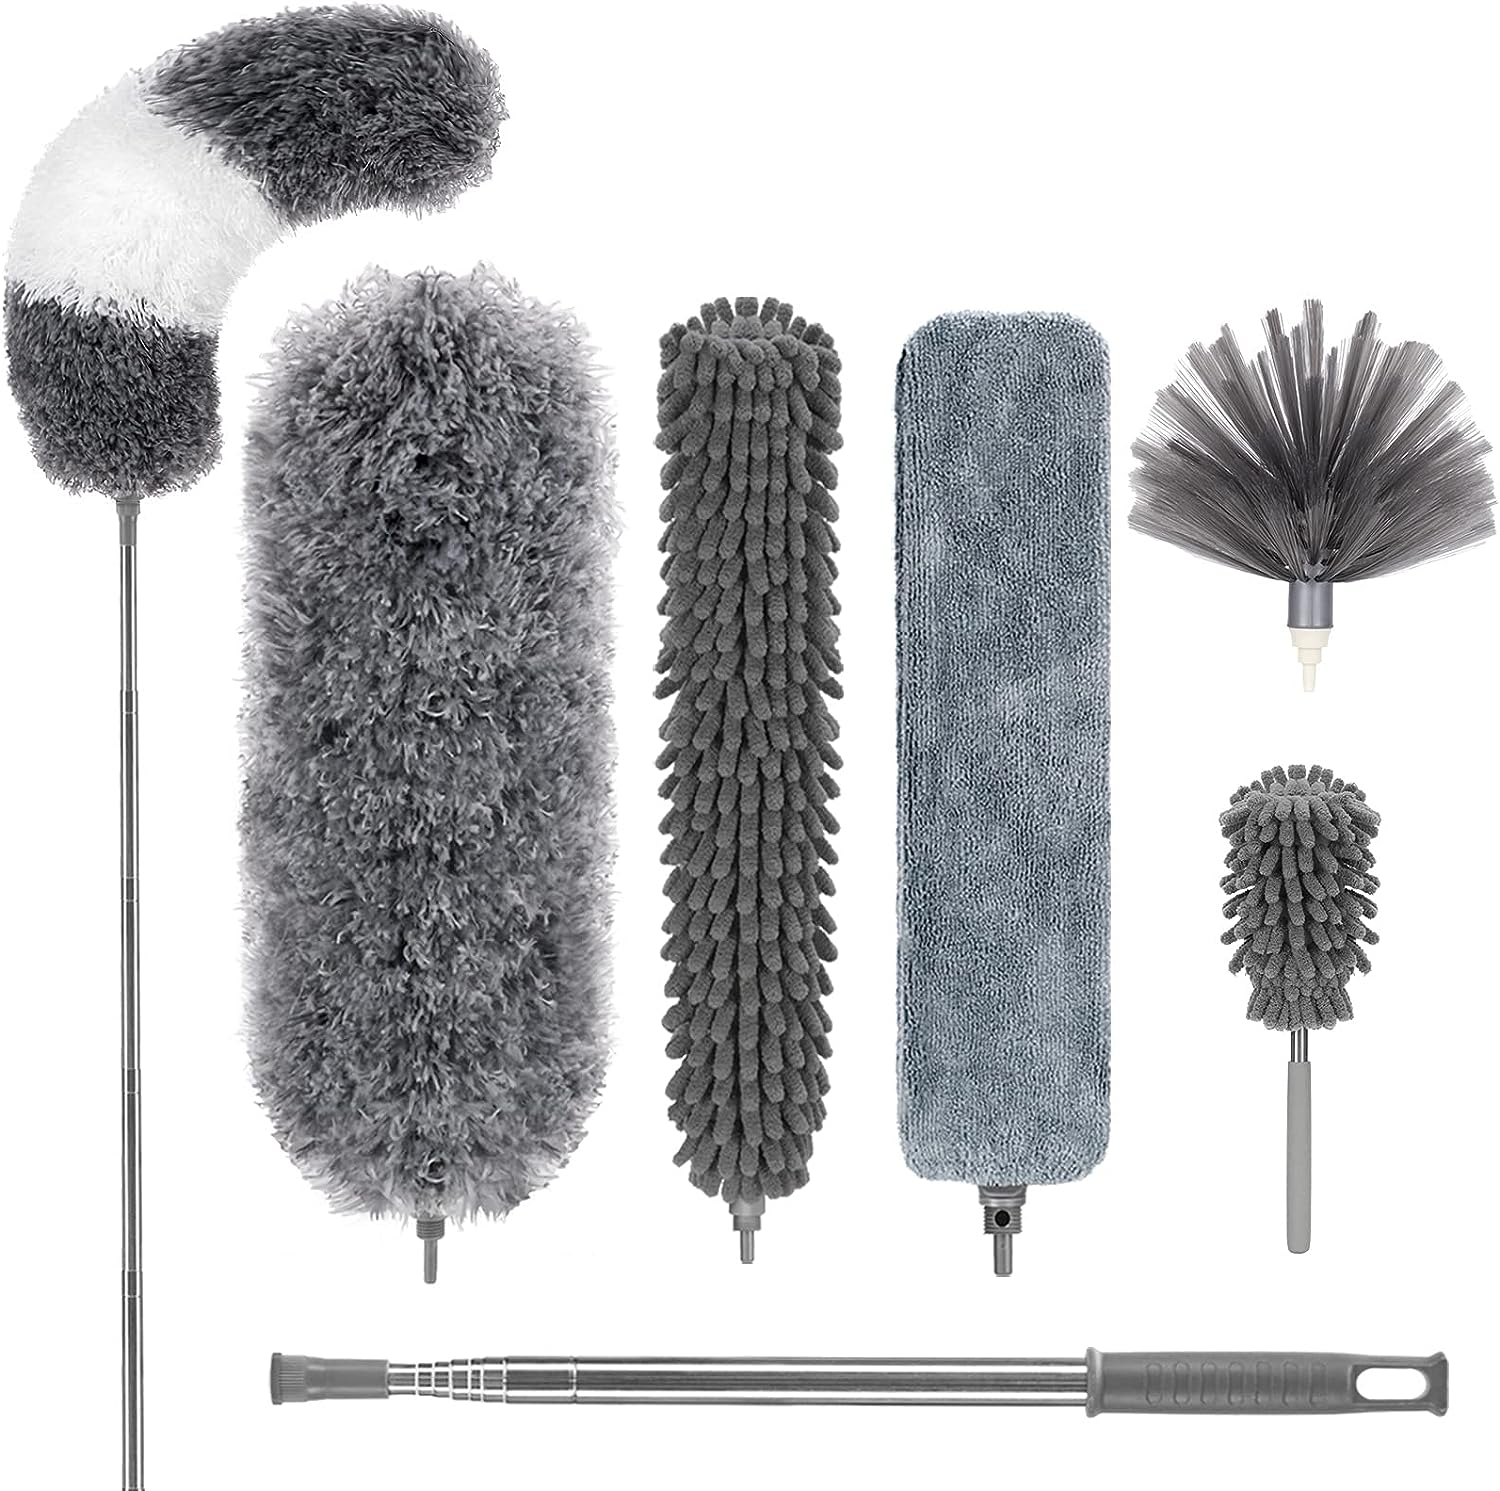 DELUX Microfiber Feather Duster